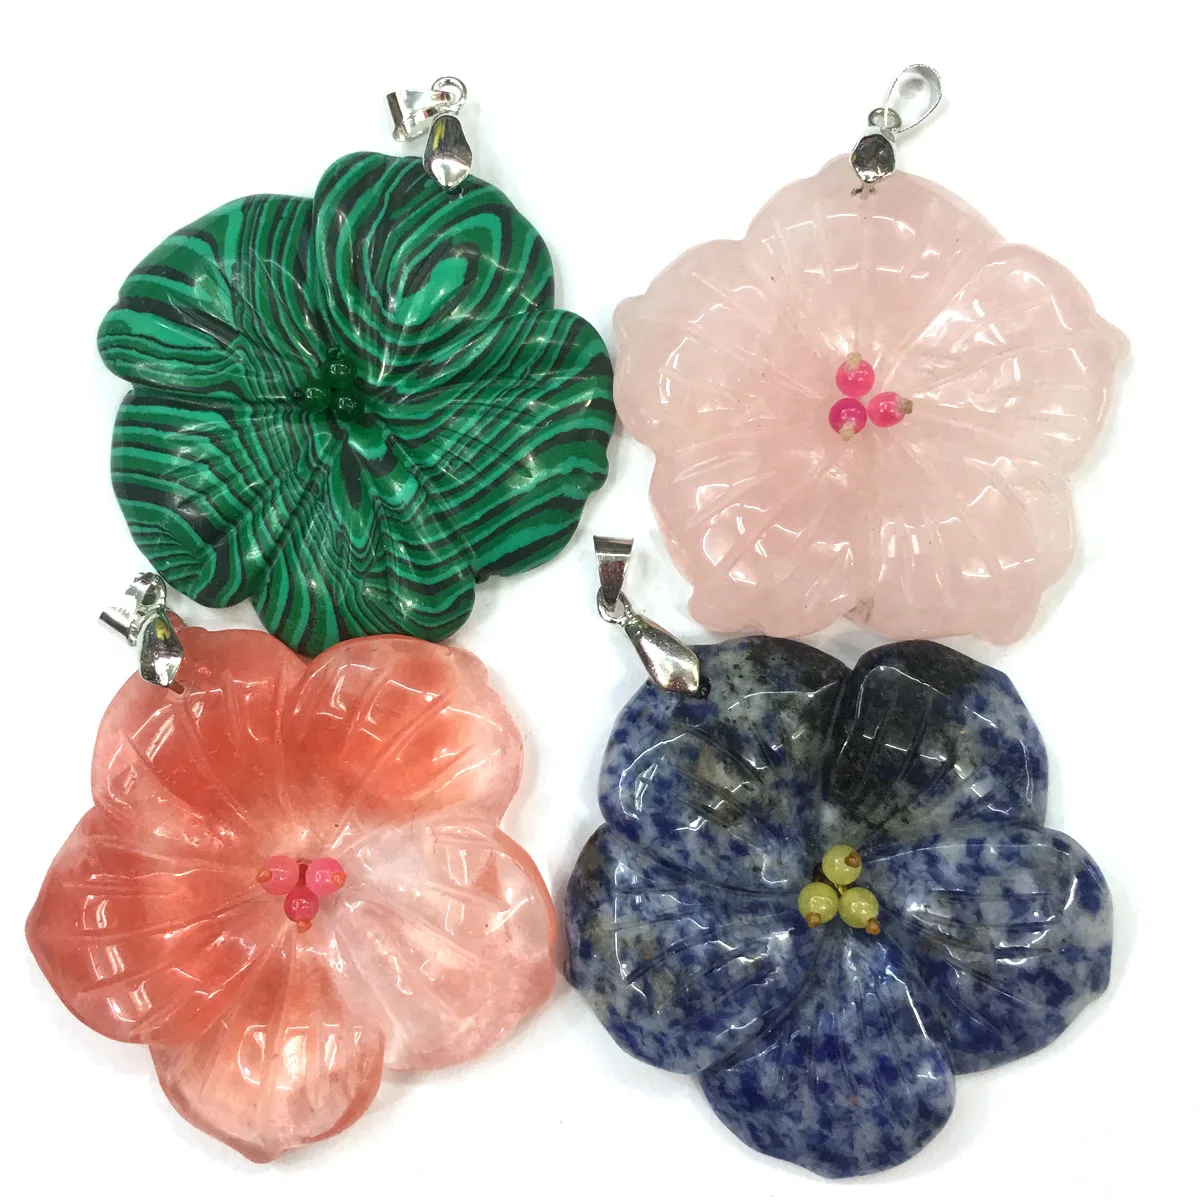 

Flower-shaped Watermelon Red Stones Pendant Reiki Healing Natural Stone Amulet DIY Jewelry Natural Stone Charms Size 50mm